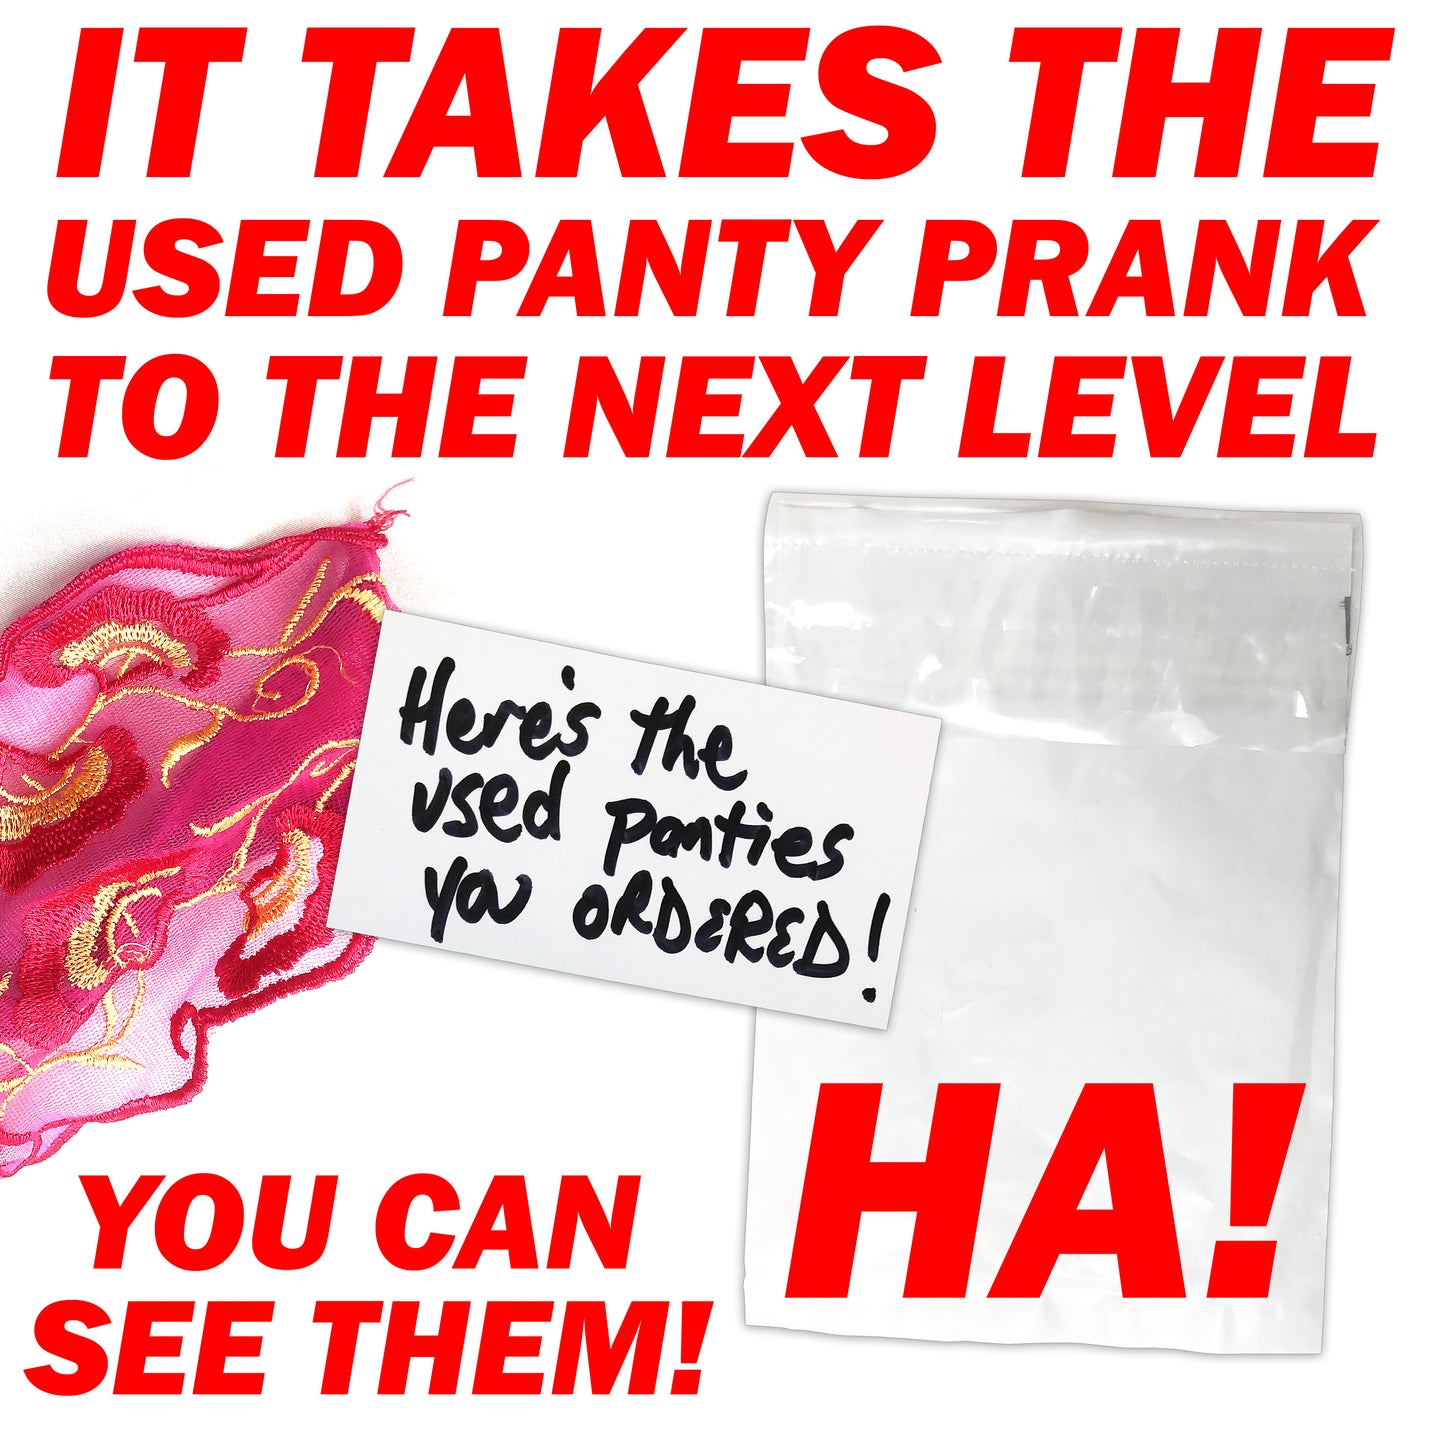 Used Panty Prank - See Through Prank Envelope Gets Mailed Directly To Your Victim!